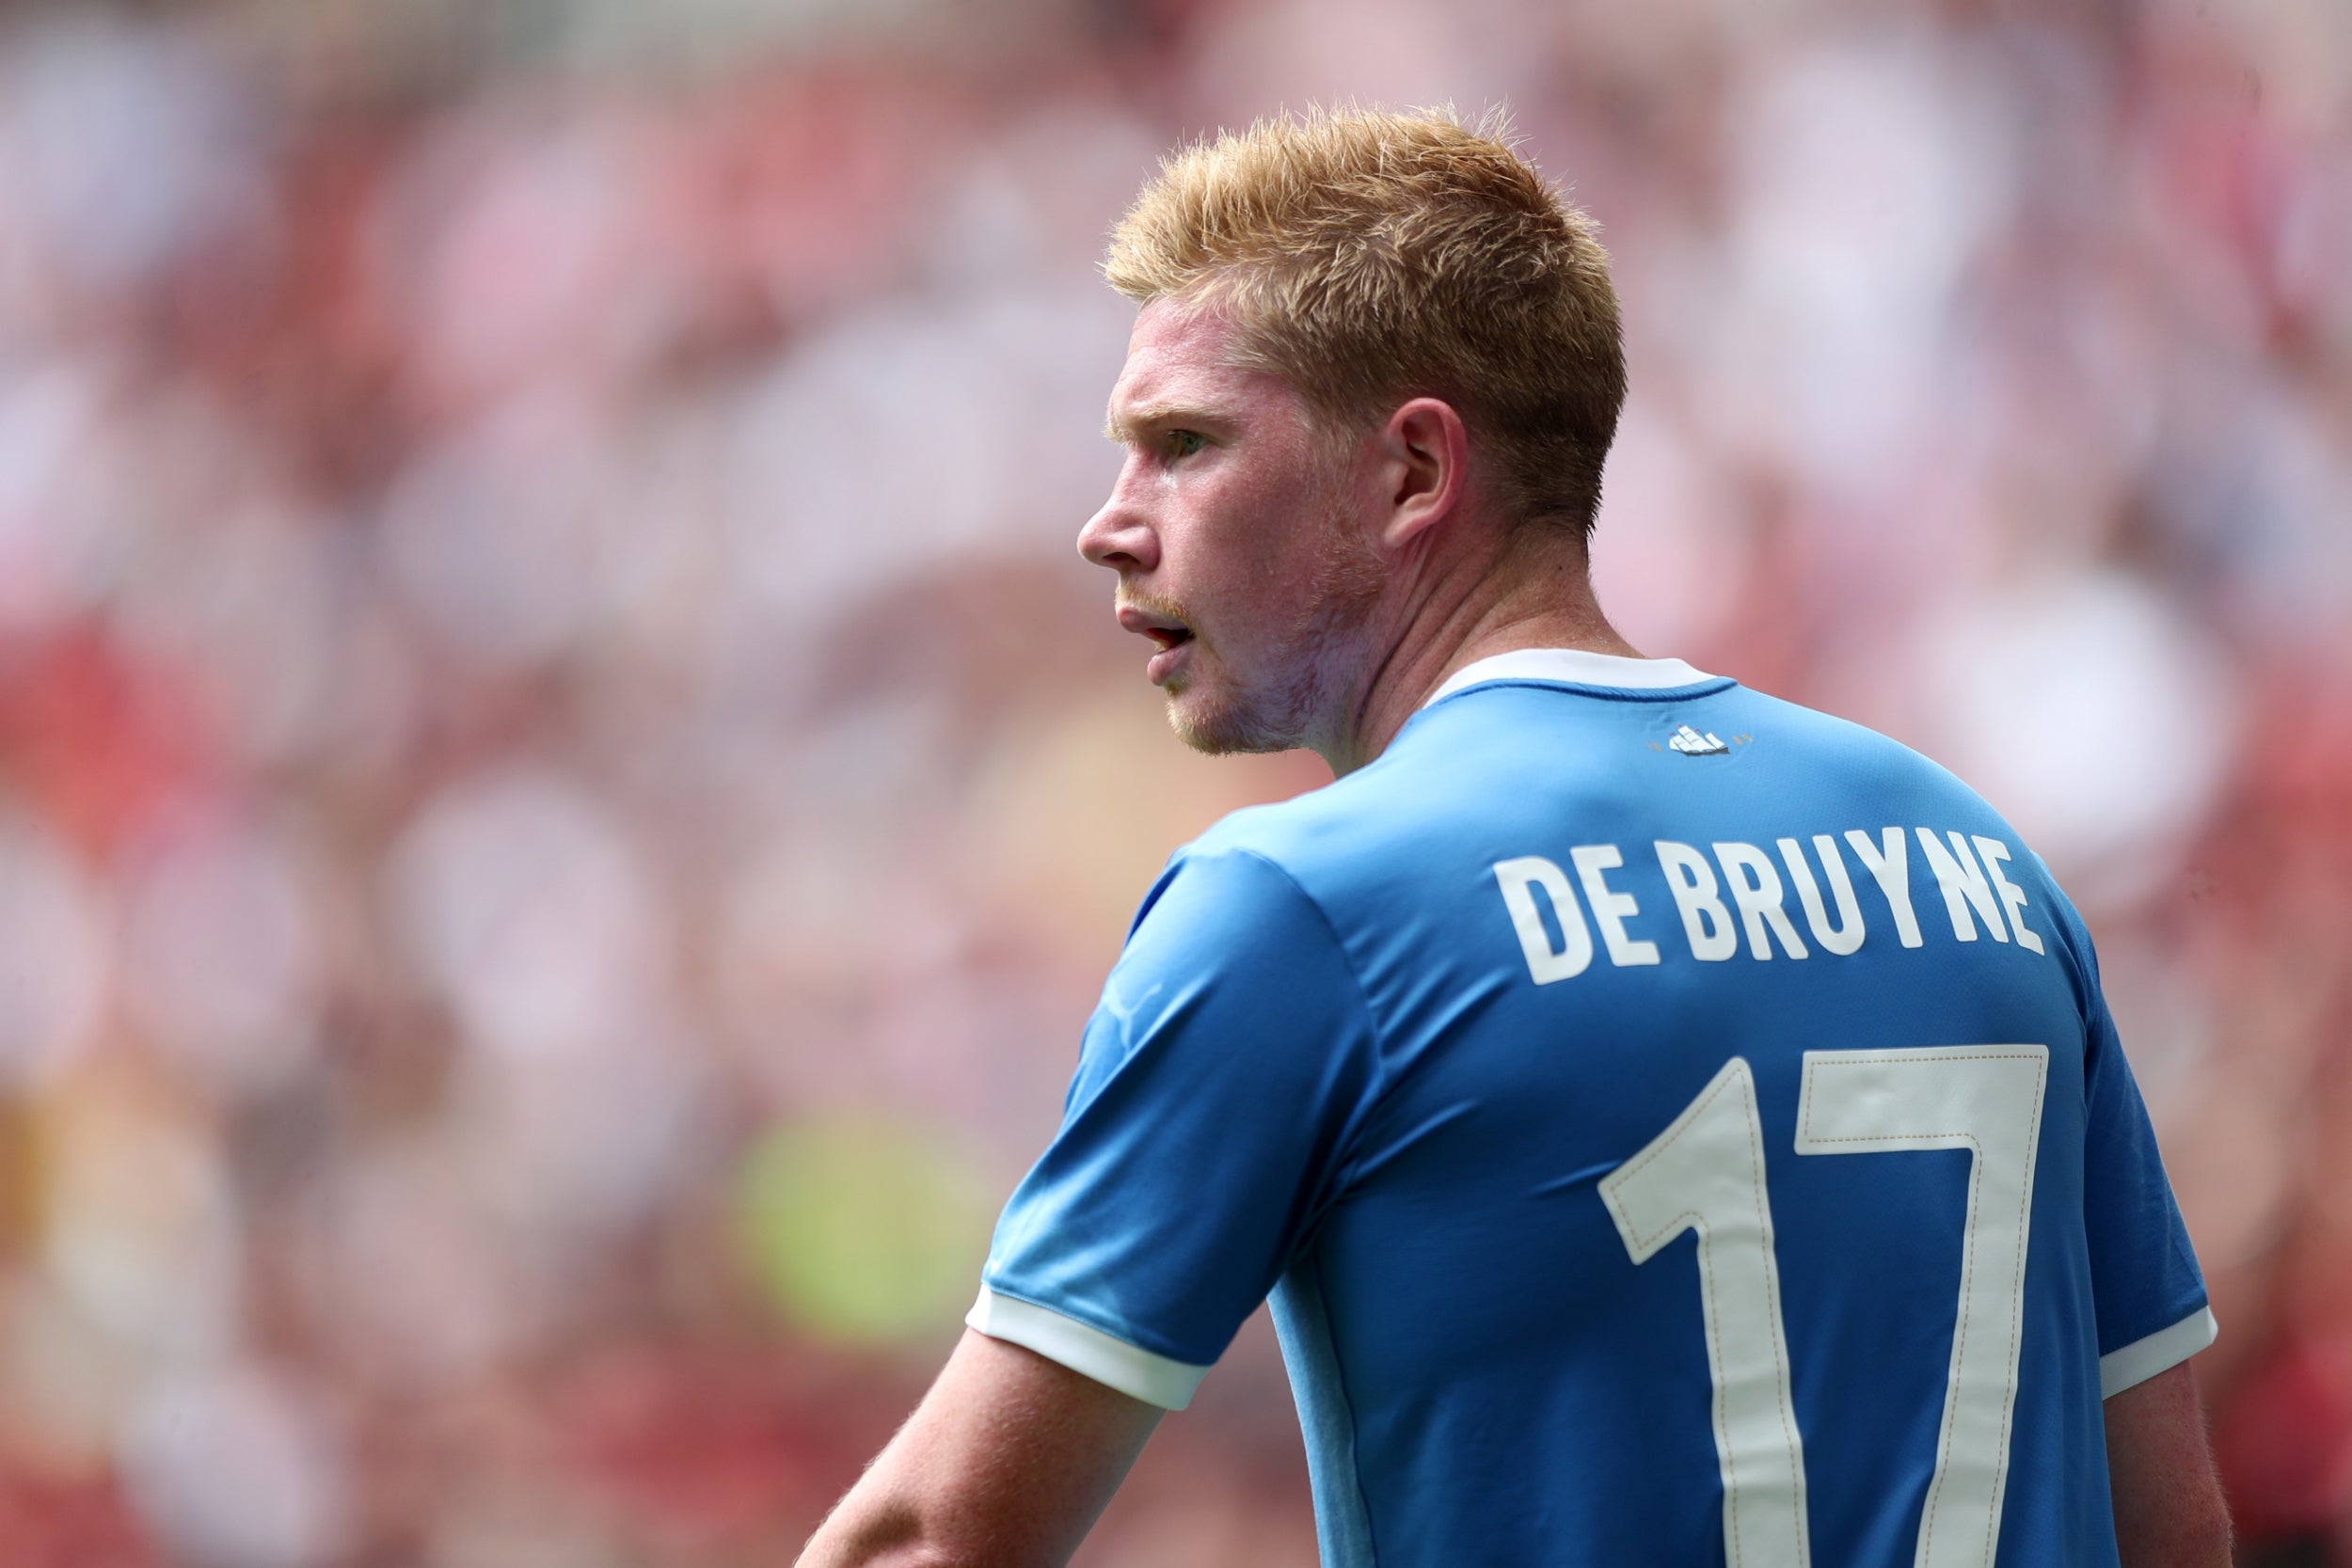 Kevin De Bruyne was in impressive form after injury blighted his season last year (Getty)